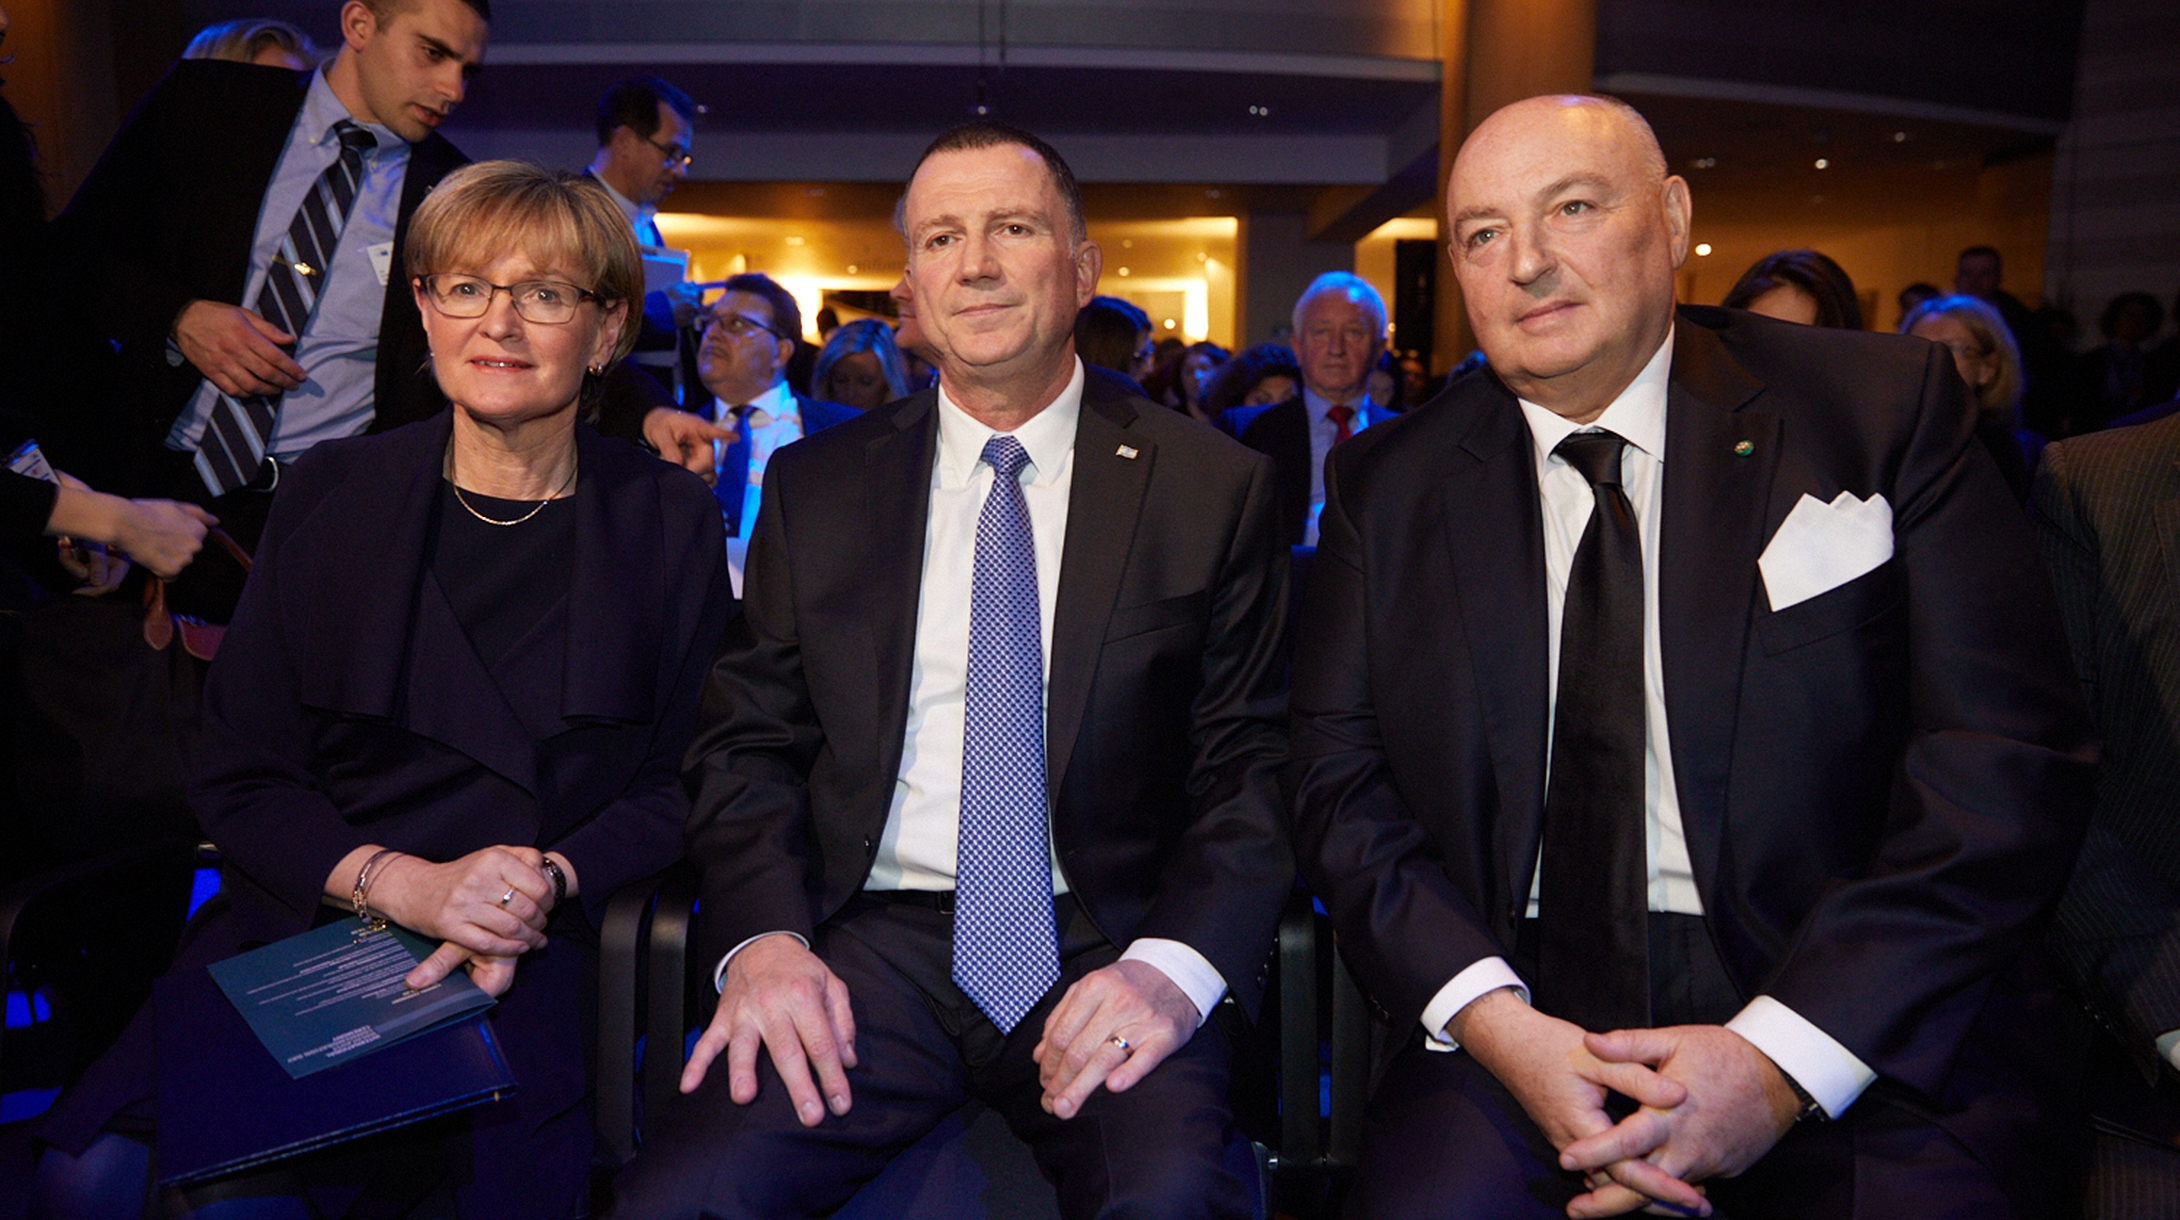 Moshe Kantor, right, with Knesset Speaker Yuli-Edelstein and European Parliament Vice President Mairead McGuinness attending a Holocaust commemoration event in Brussels, Belgium on Jan. 24, 2019. (Erez Lichtfeld)